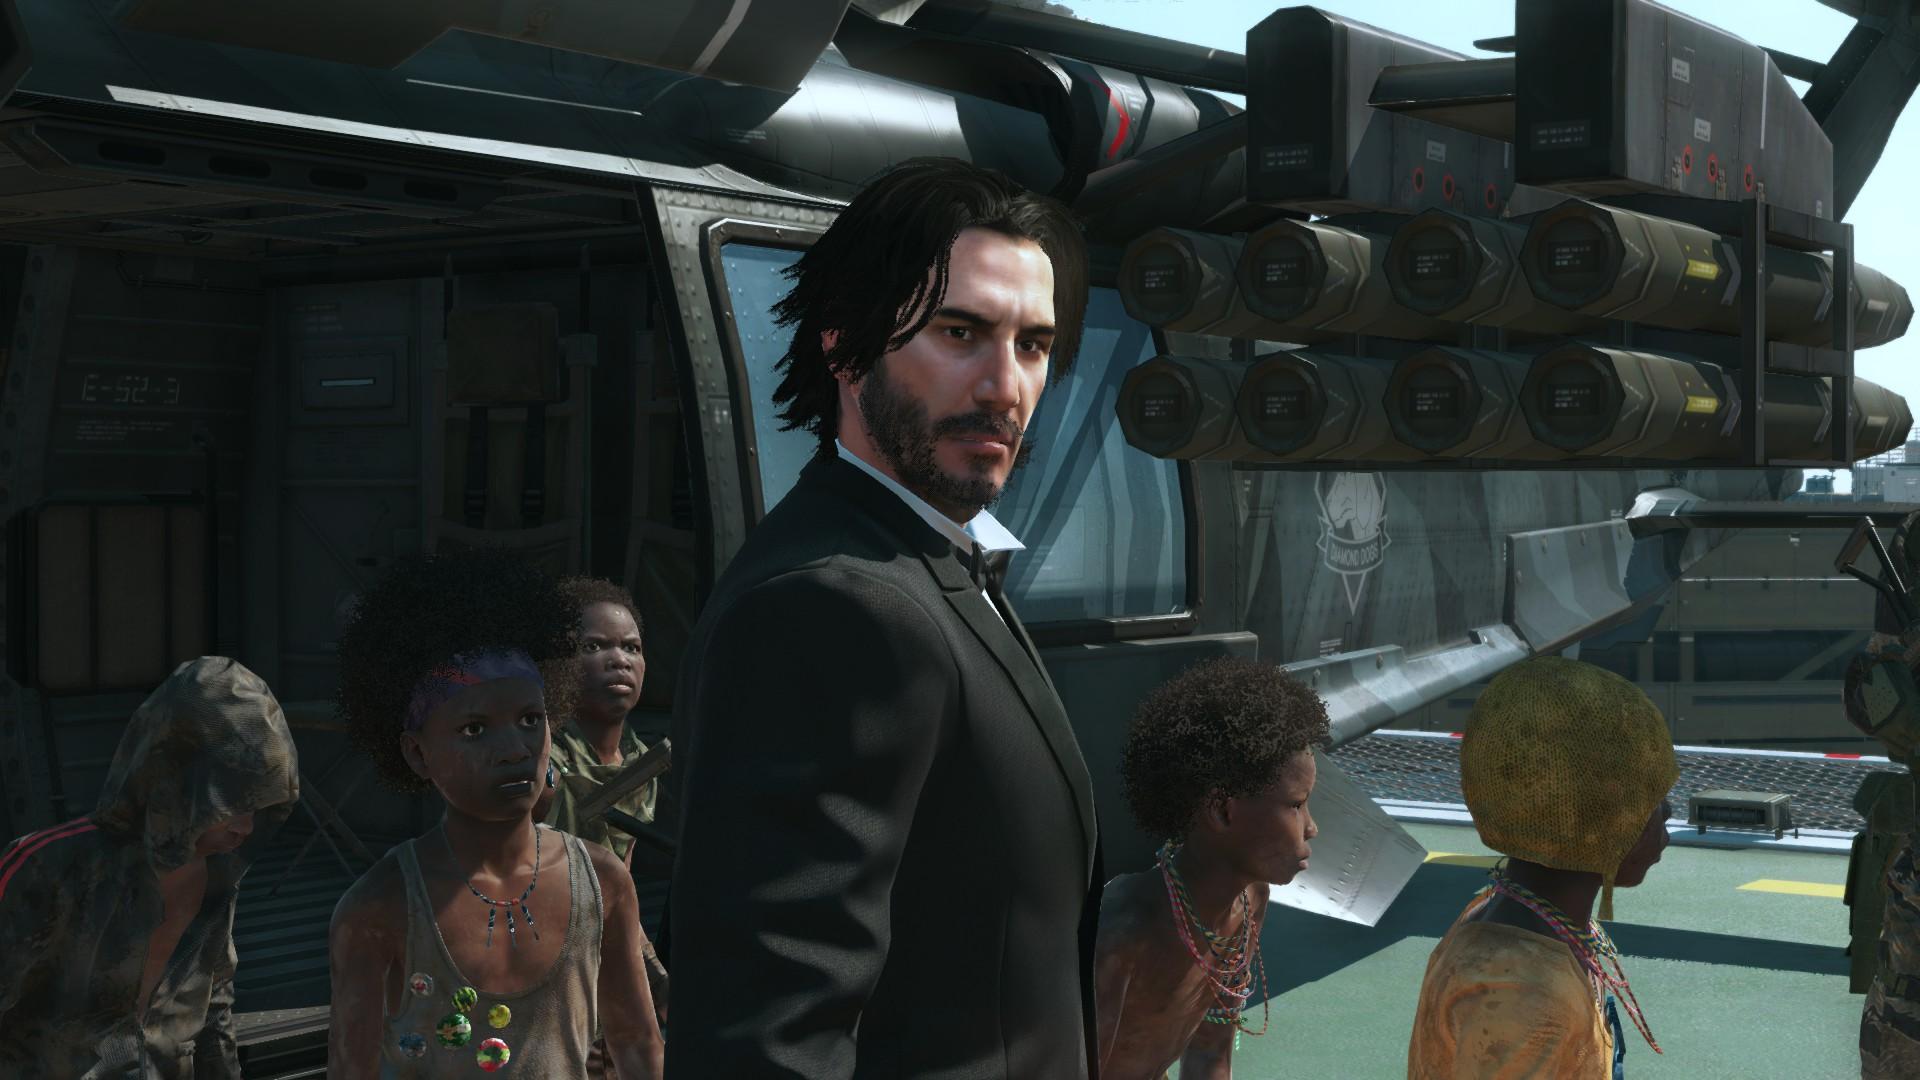 You Can Now Play As Keanu Reeves In Metal Gear Solid 5